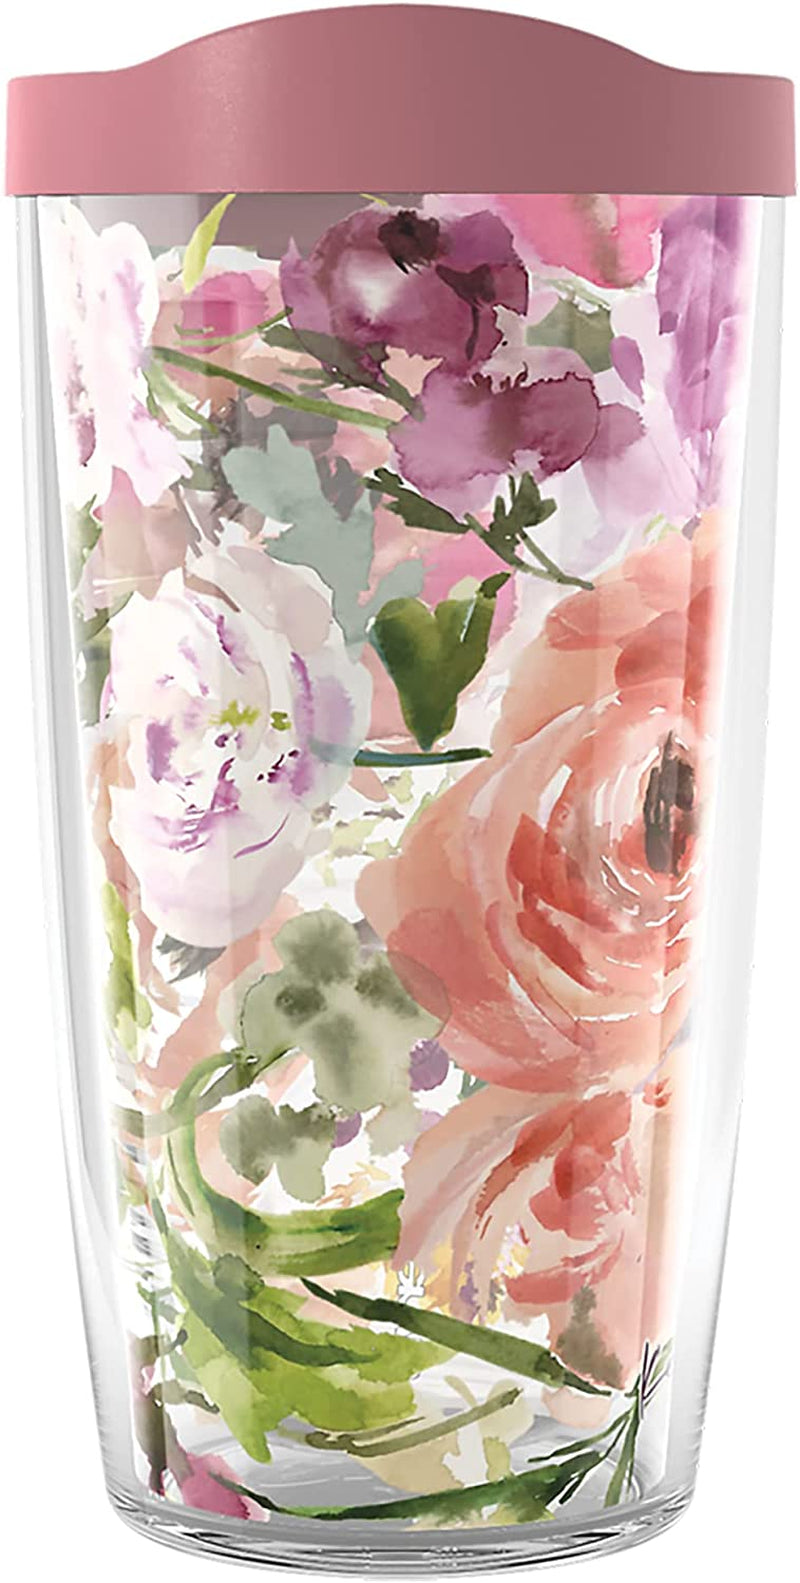 Tervis Made in USA Double Walled Kelly Ventura Floral Collection Insulated Tumbler Cup Keeps Drinks Cold & Hot, 16Oz 4Pk - Classic, Assorted Home & Garden > Kitchen & Dining > Tableware > Drinkware Tervis Heather Rose 16oz - Classic 